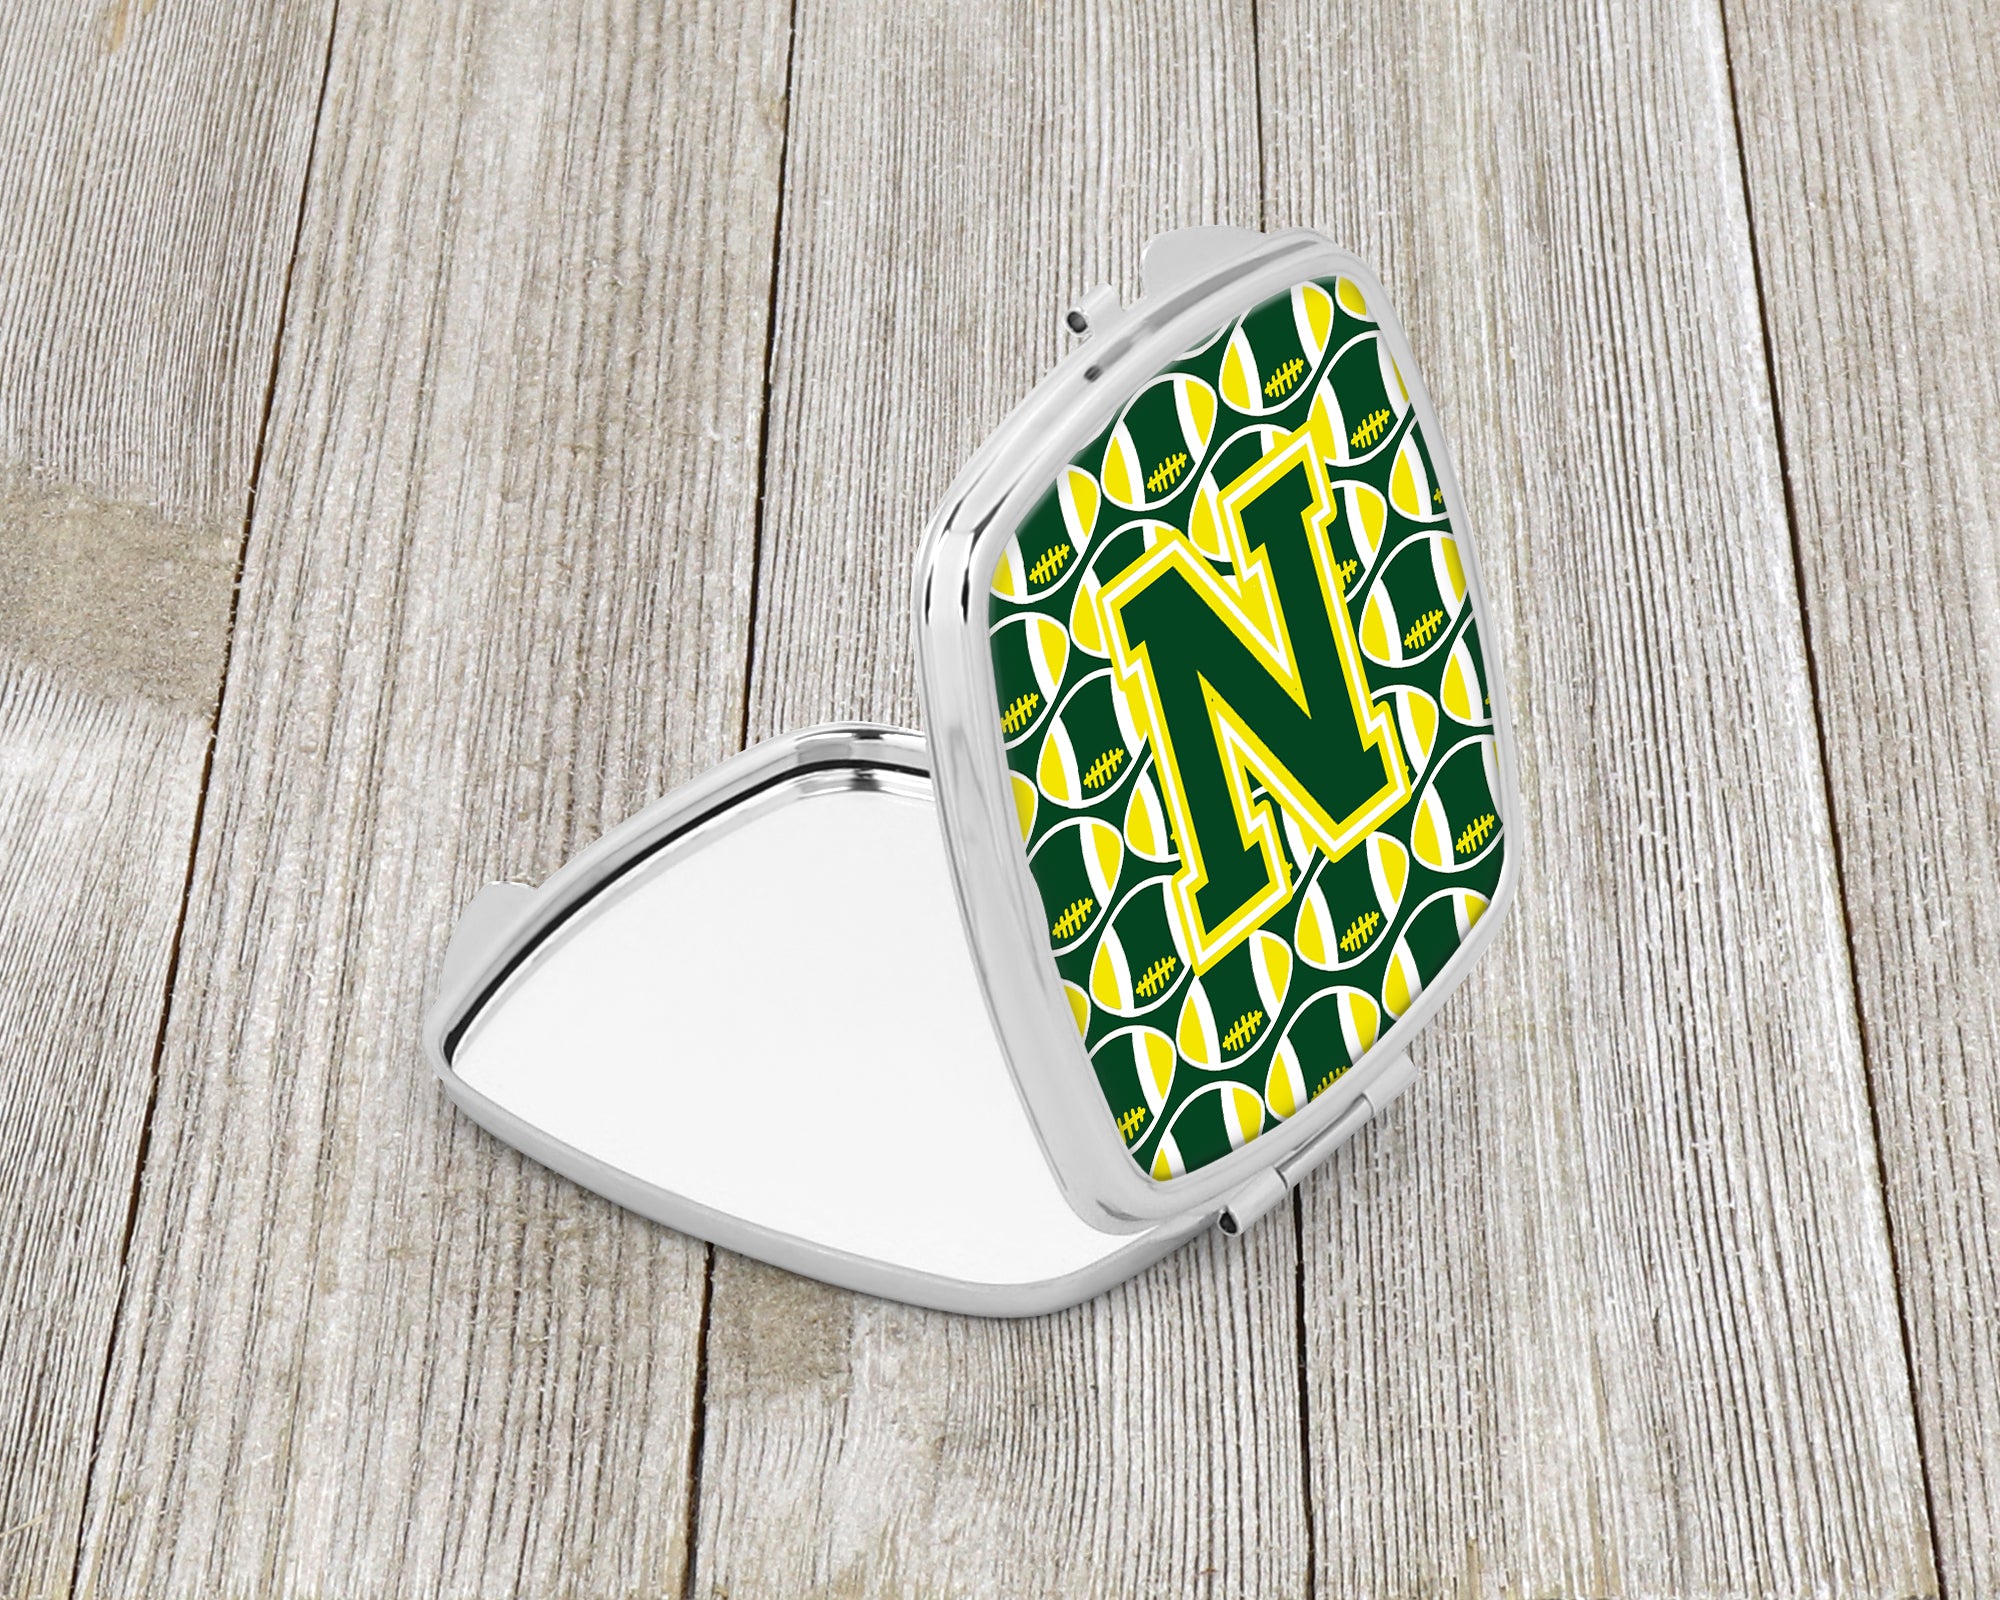 Letter N Football Green and Yellow Compact Mirror CJ1075-NSCM  the-store.com.